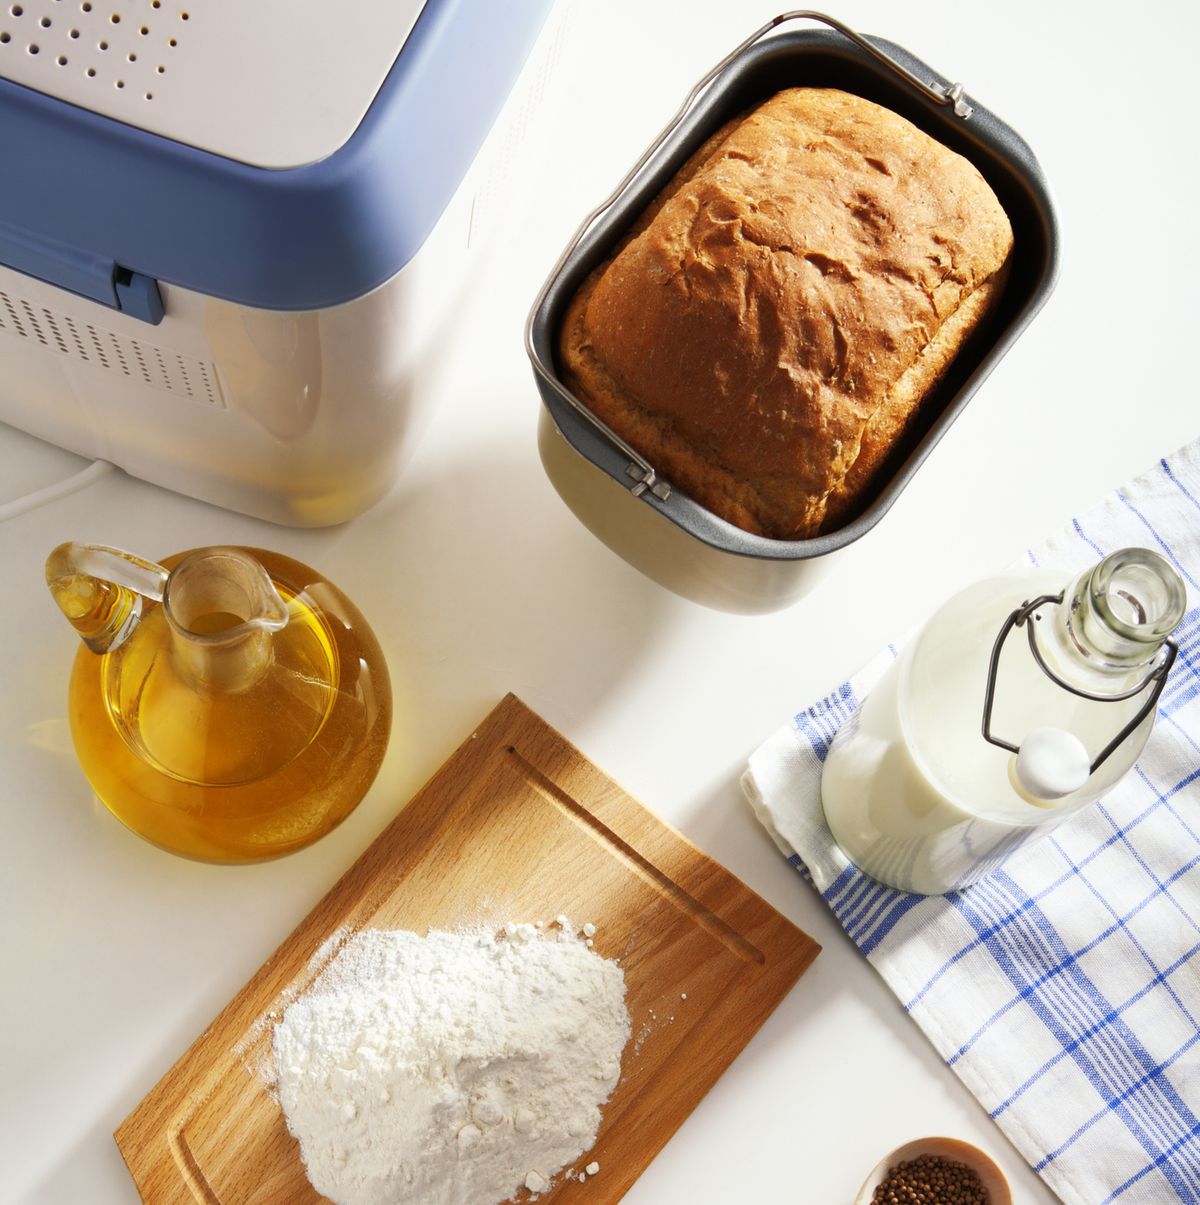 https://hips.hearstapps.com/hmg-prod/images/how-to-use-a-breadmaker-1650401213.jpg?crop=1.00xw:0.700xh;0,0&resize=1200:*